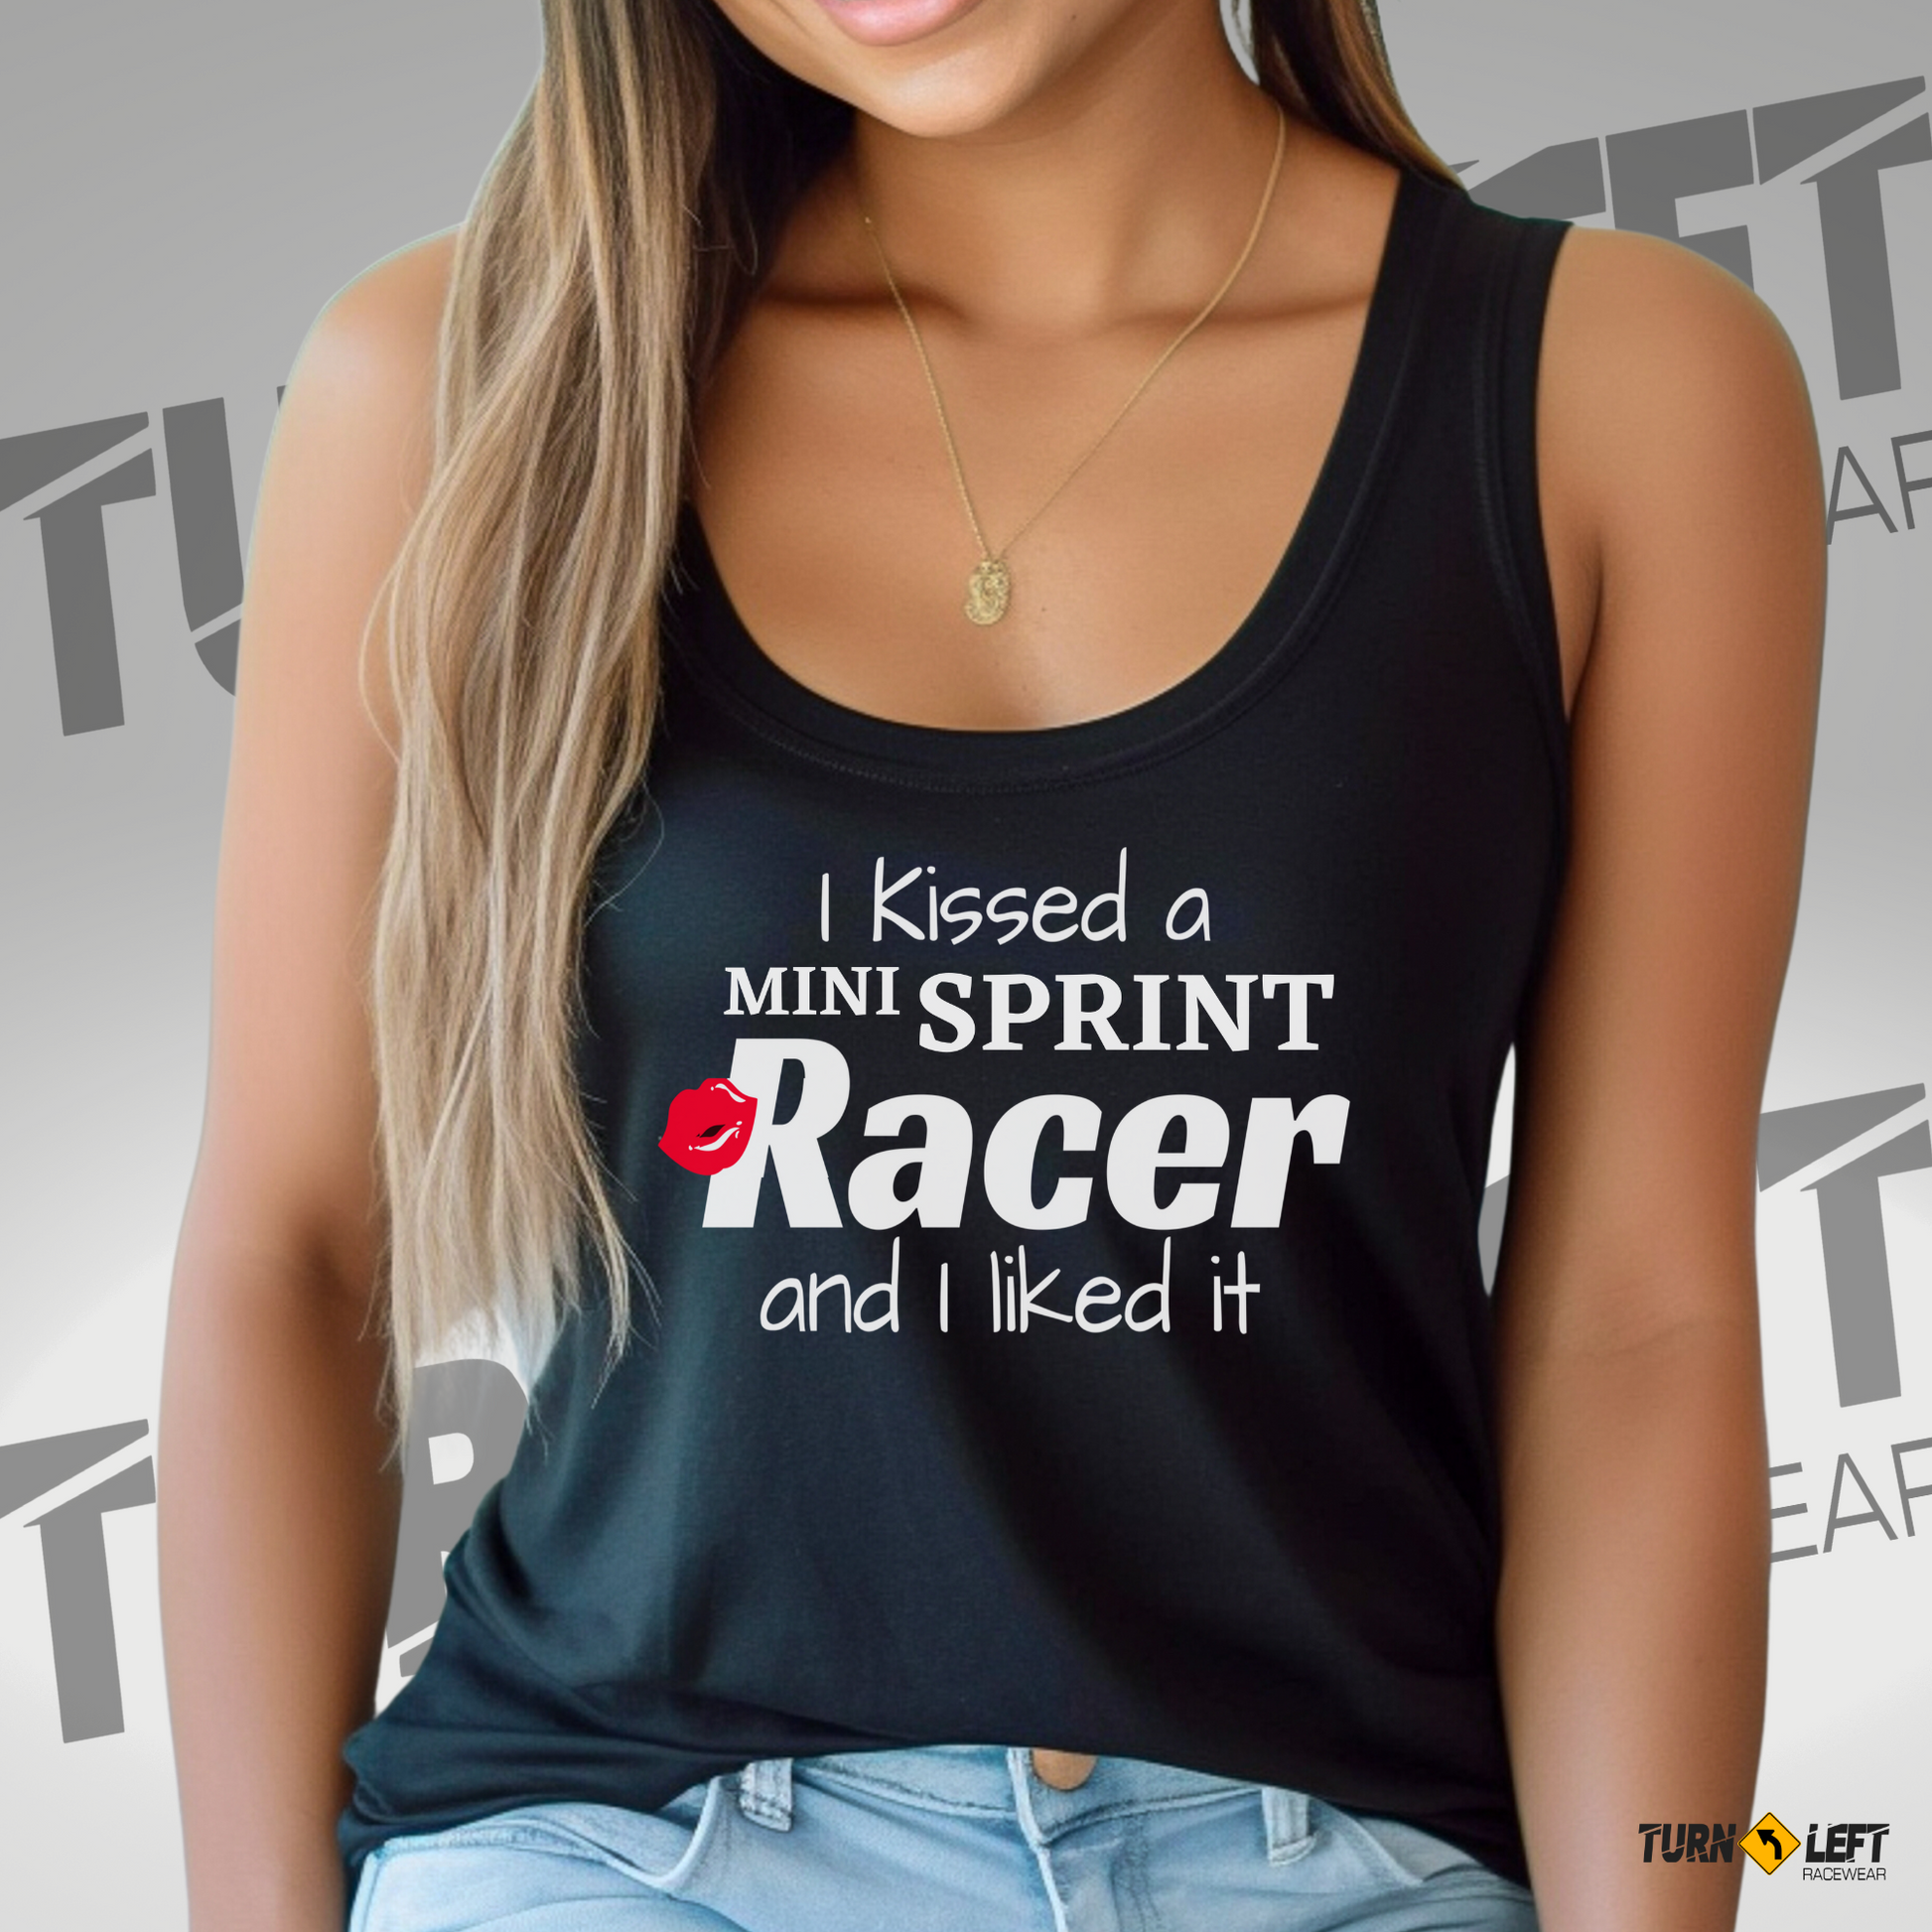 I Kissed A Mini Sprint Racer And I Liked It Tank Top. Women's Dirt Track Racing Shirts